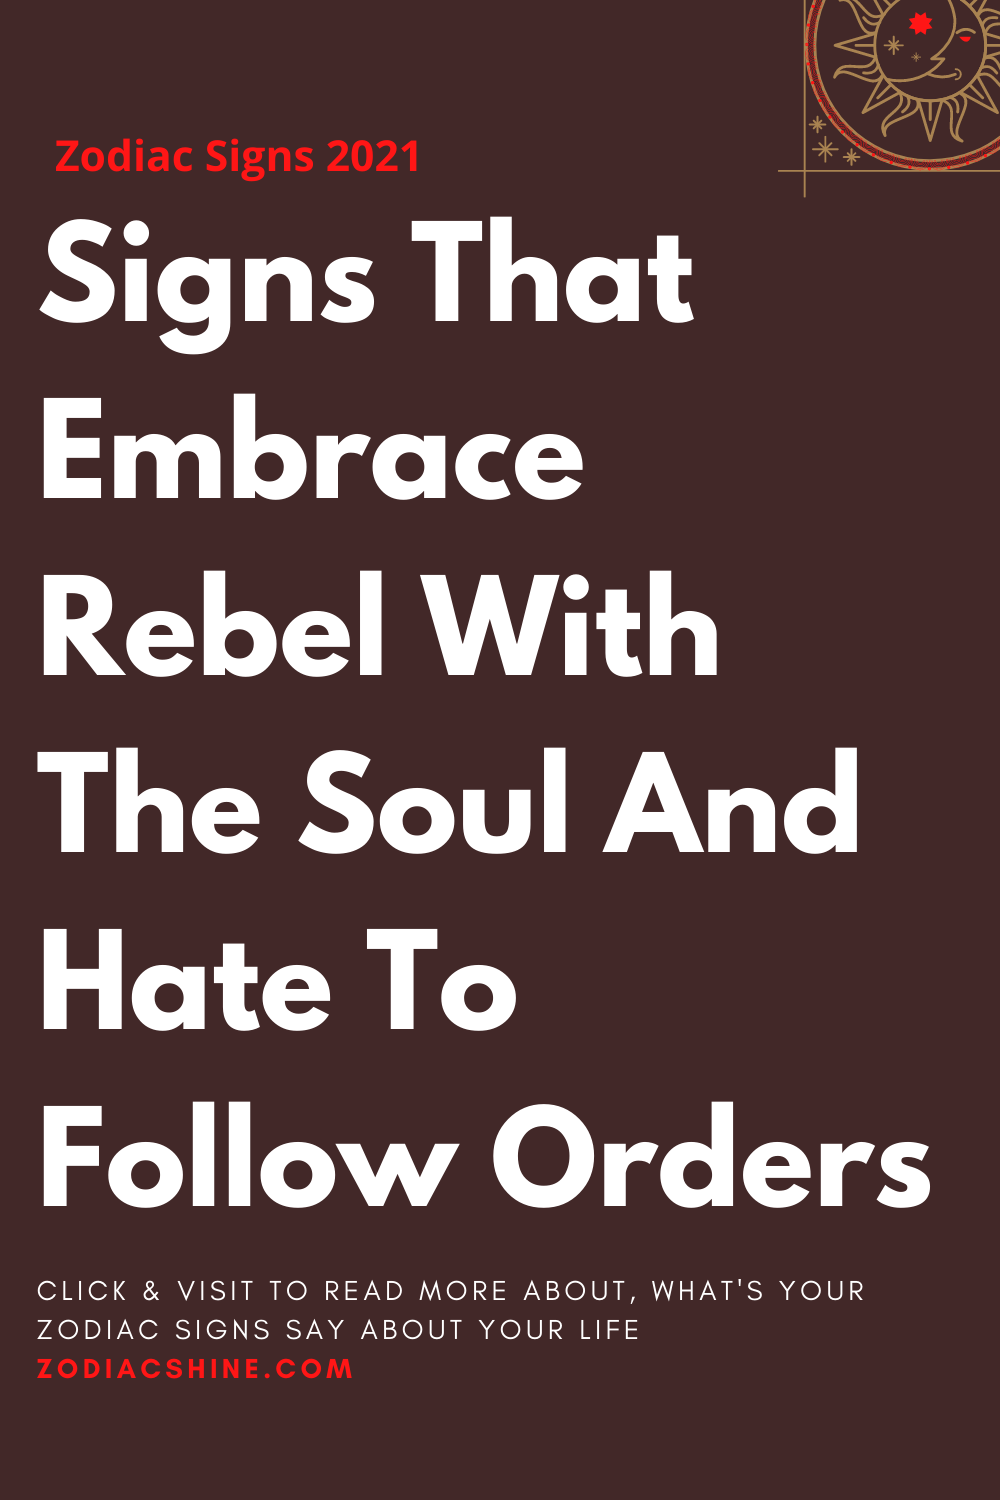 Signs That Embrace Rebel With The Soul And Hate To Follow Orders